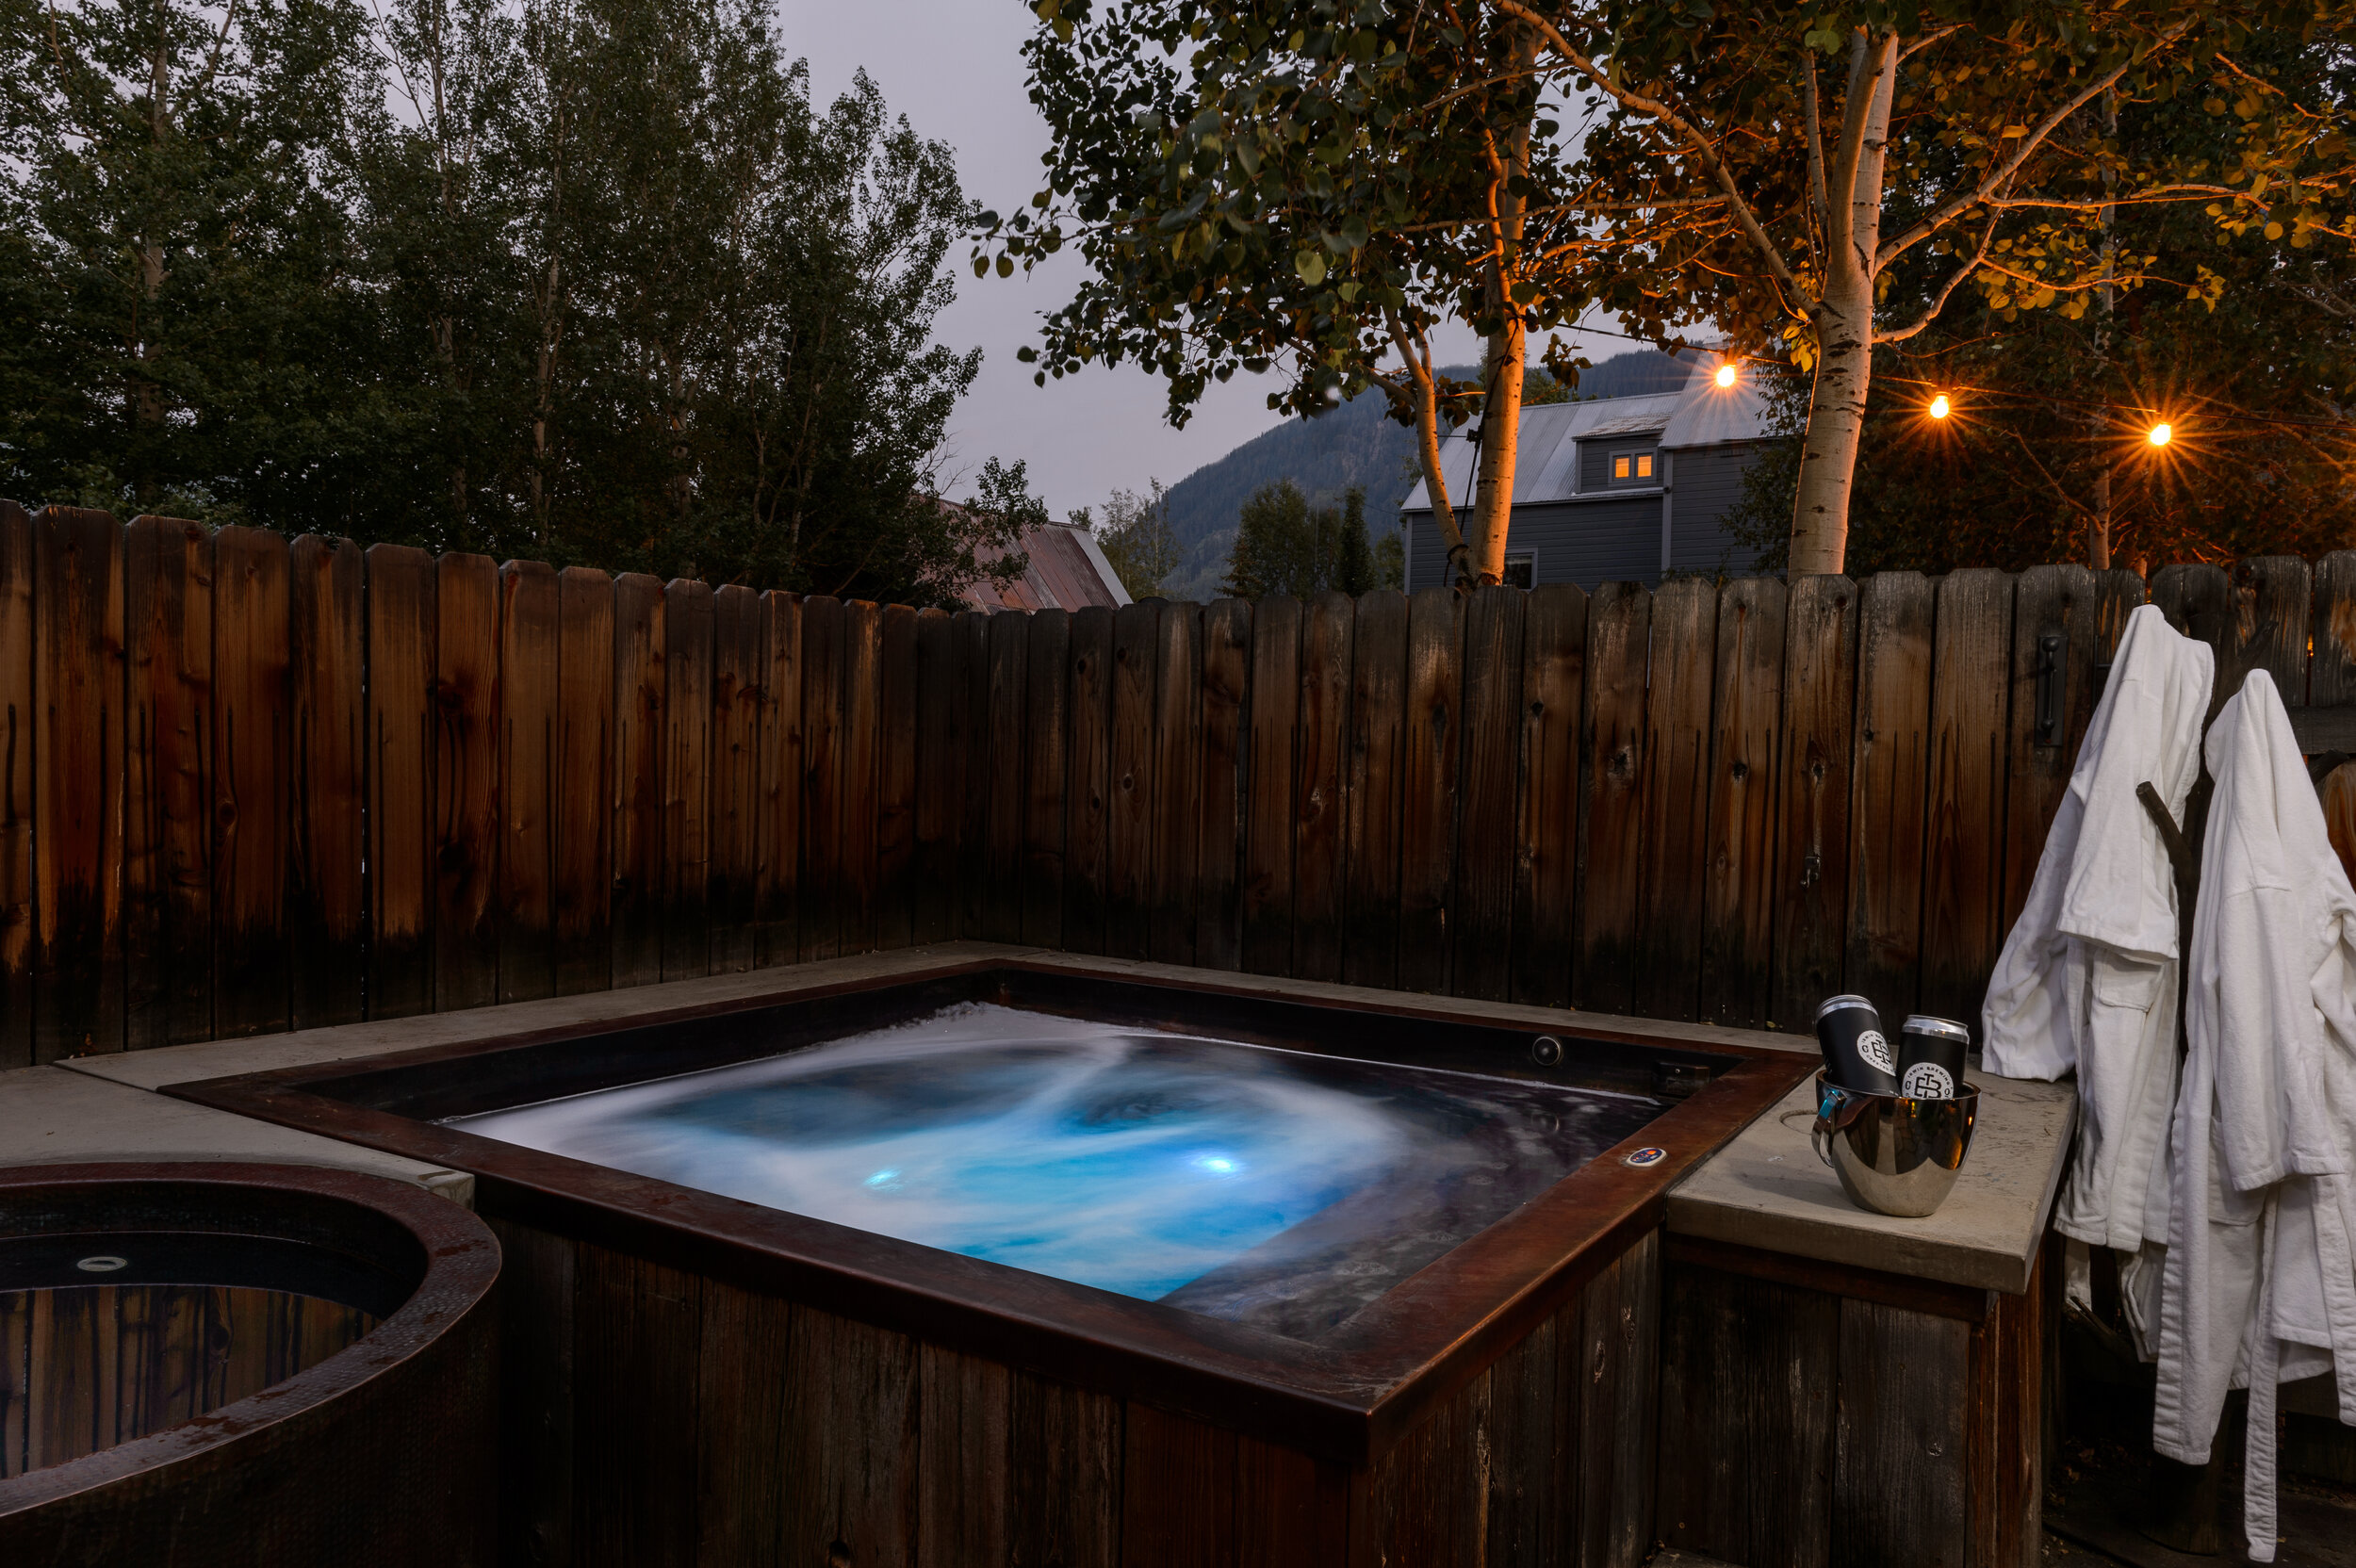   Hot tub at Sopris House (photo credit: Eleven Experience)  